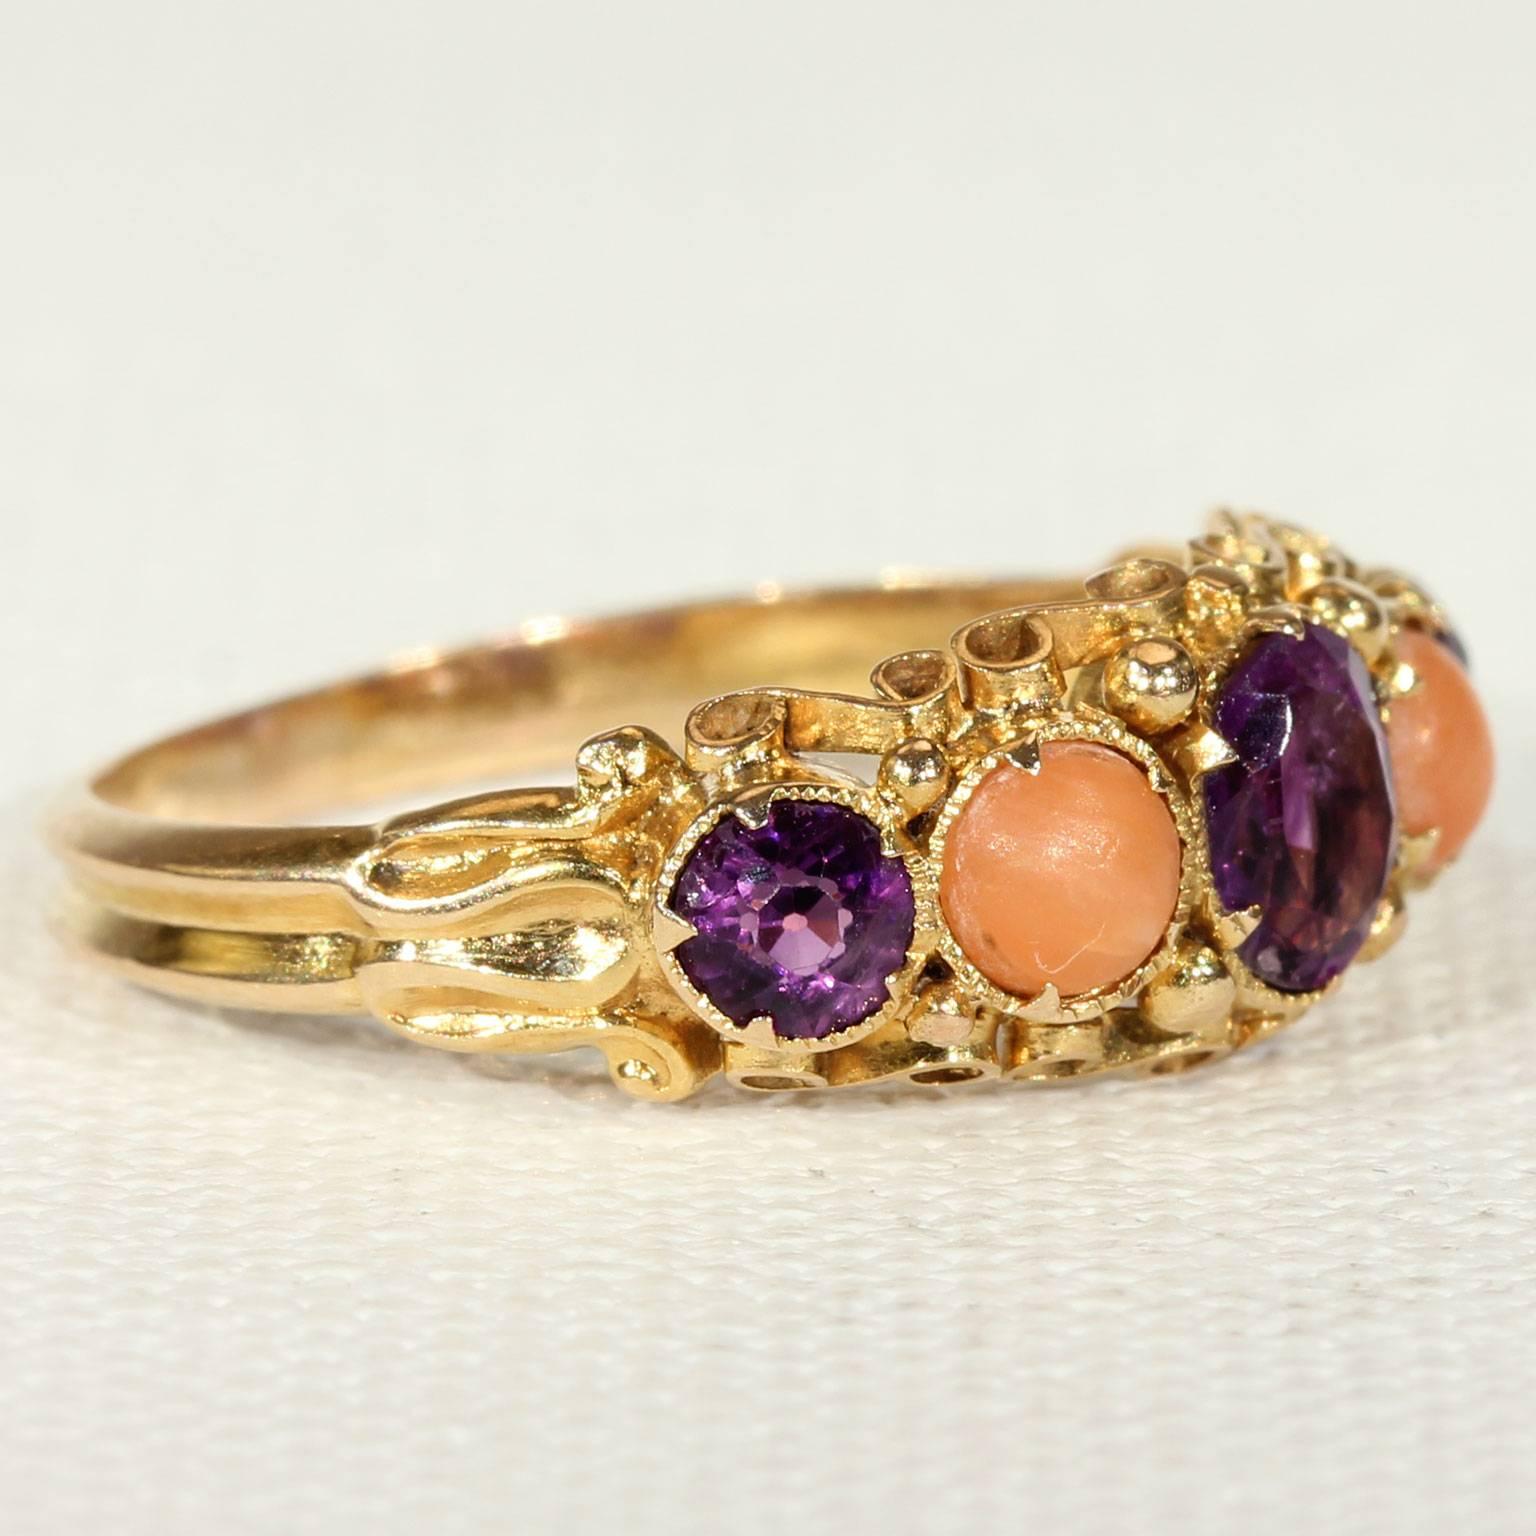 This wonderful Antique Victorian coral and amethyst ring was handcrafted in 12 karat gold. It was made in Europe around 1870. This ring holds two peach colored corals, both cabochon cut and oh, so lovely. They each measure 4.6 mm in diameter and 1.6